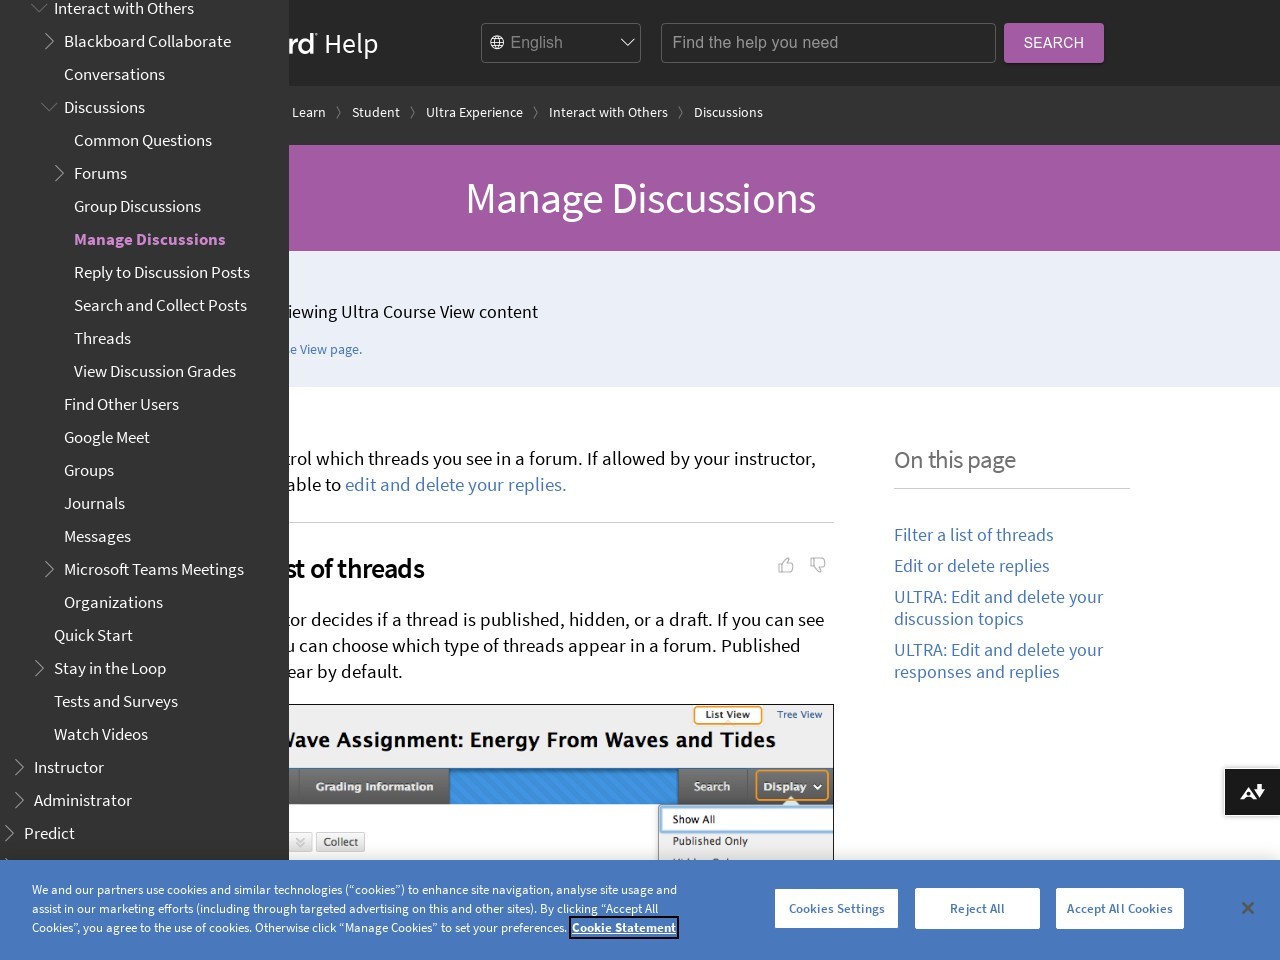 Manage Discussions | Blackboard Help